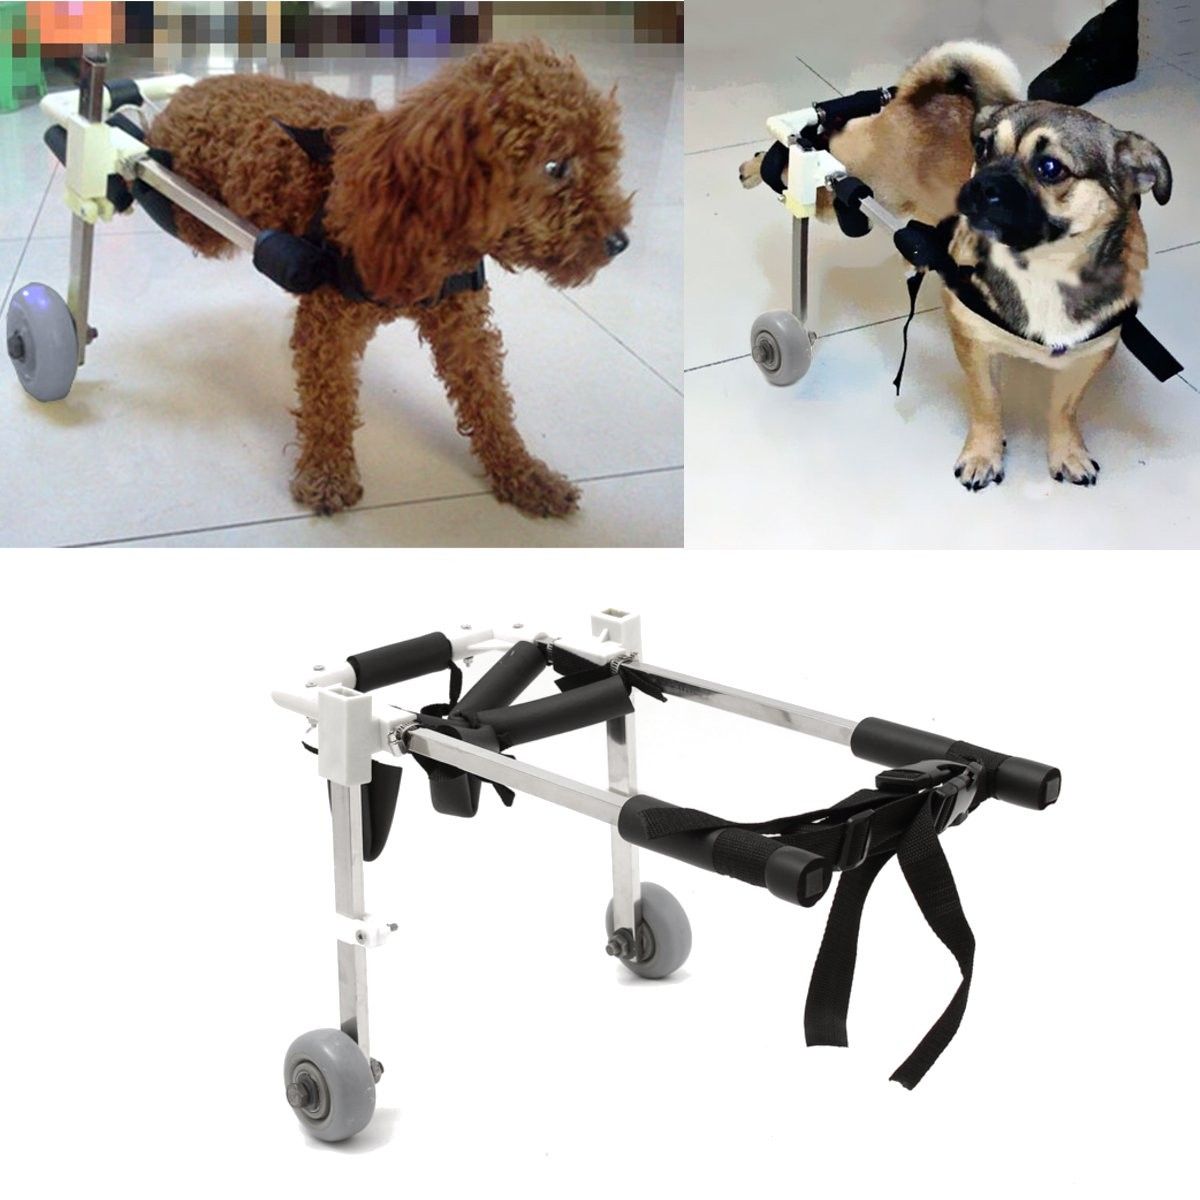 10-Inch-Stainless-Steel-Pet-Dog-Cart-Wheelchair-Walk-for-Handicapped-Doggie-Folding-Chair-1341069